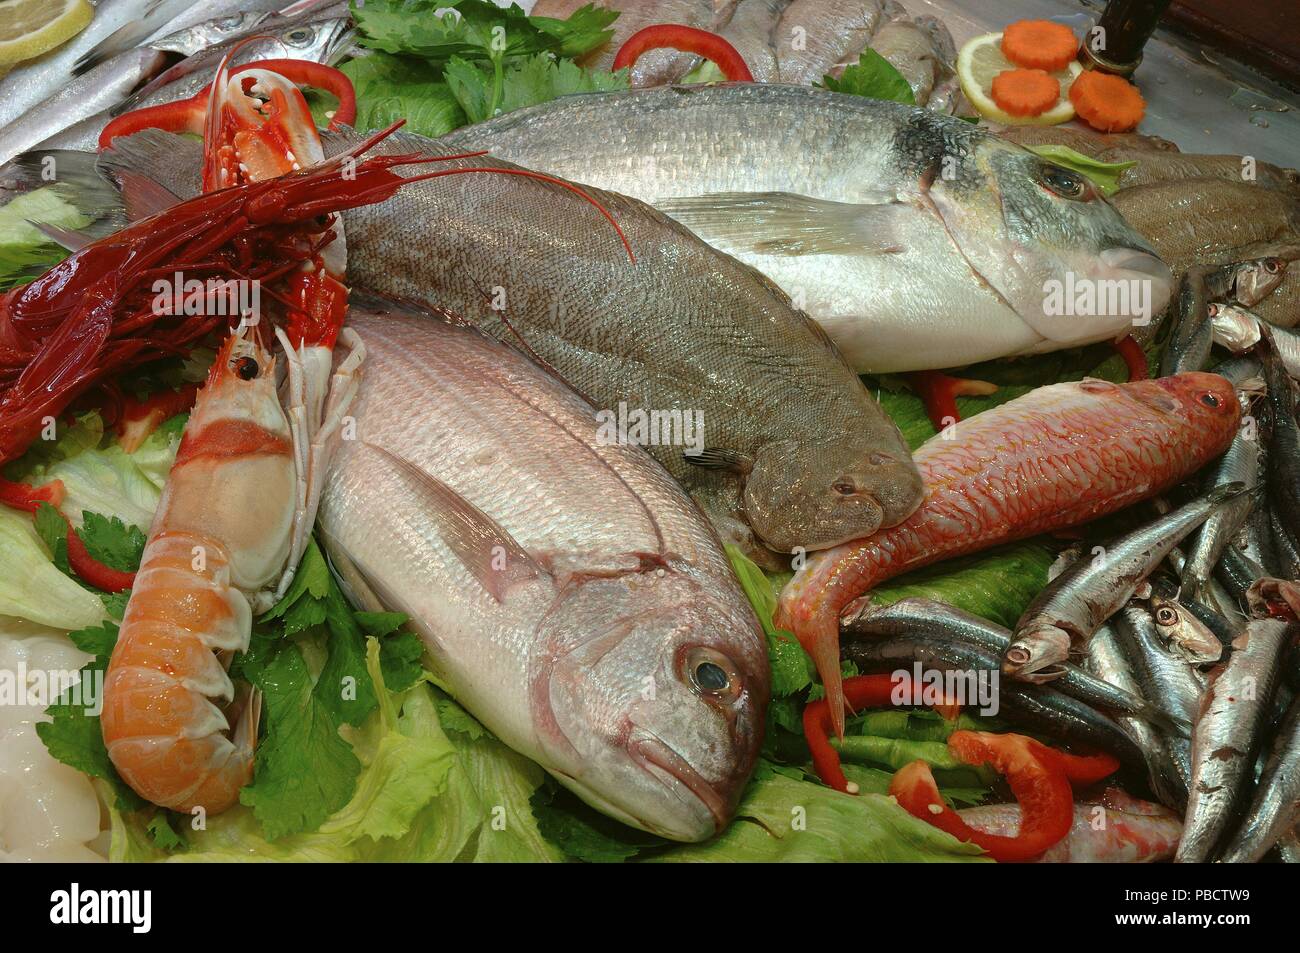 Fresh fish and seafood, Cadiz, Region of Andalusia, Spain, Europe. Stock Photo